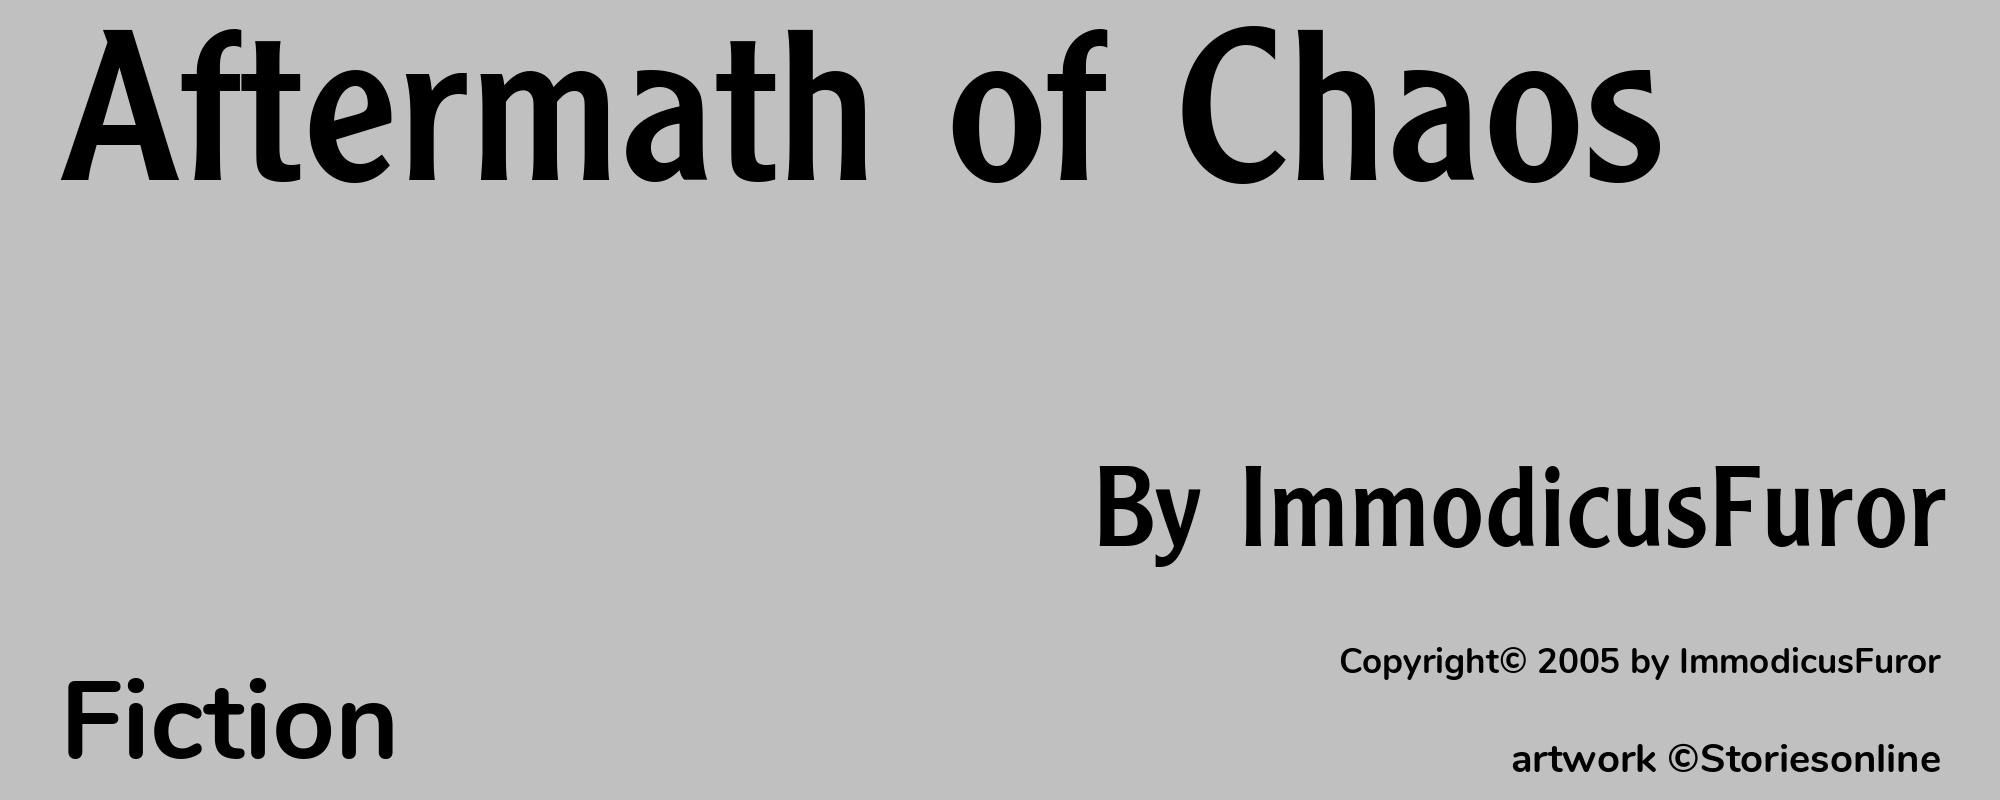 Aftermath of Chaos - Cover